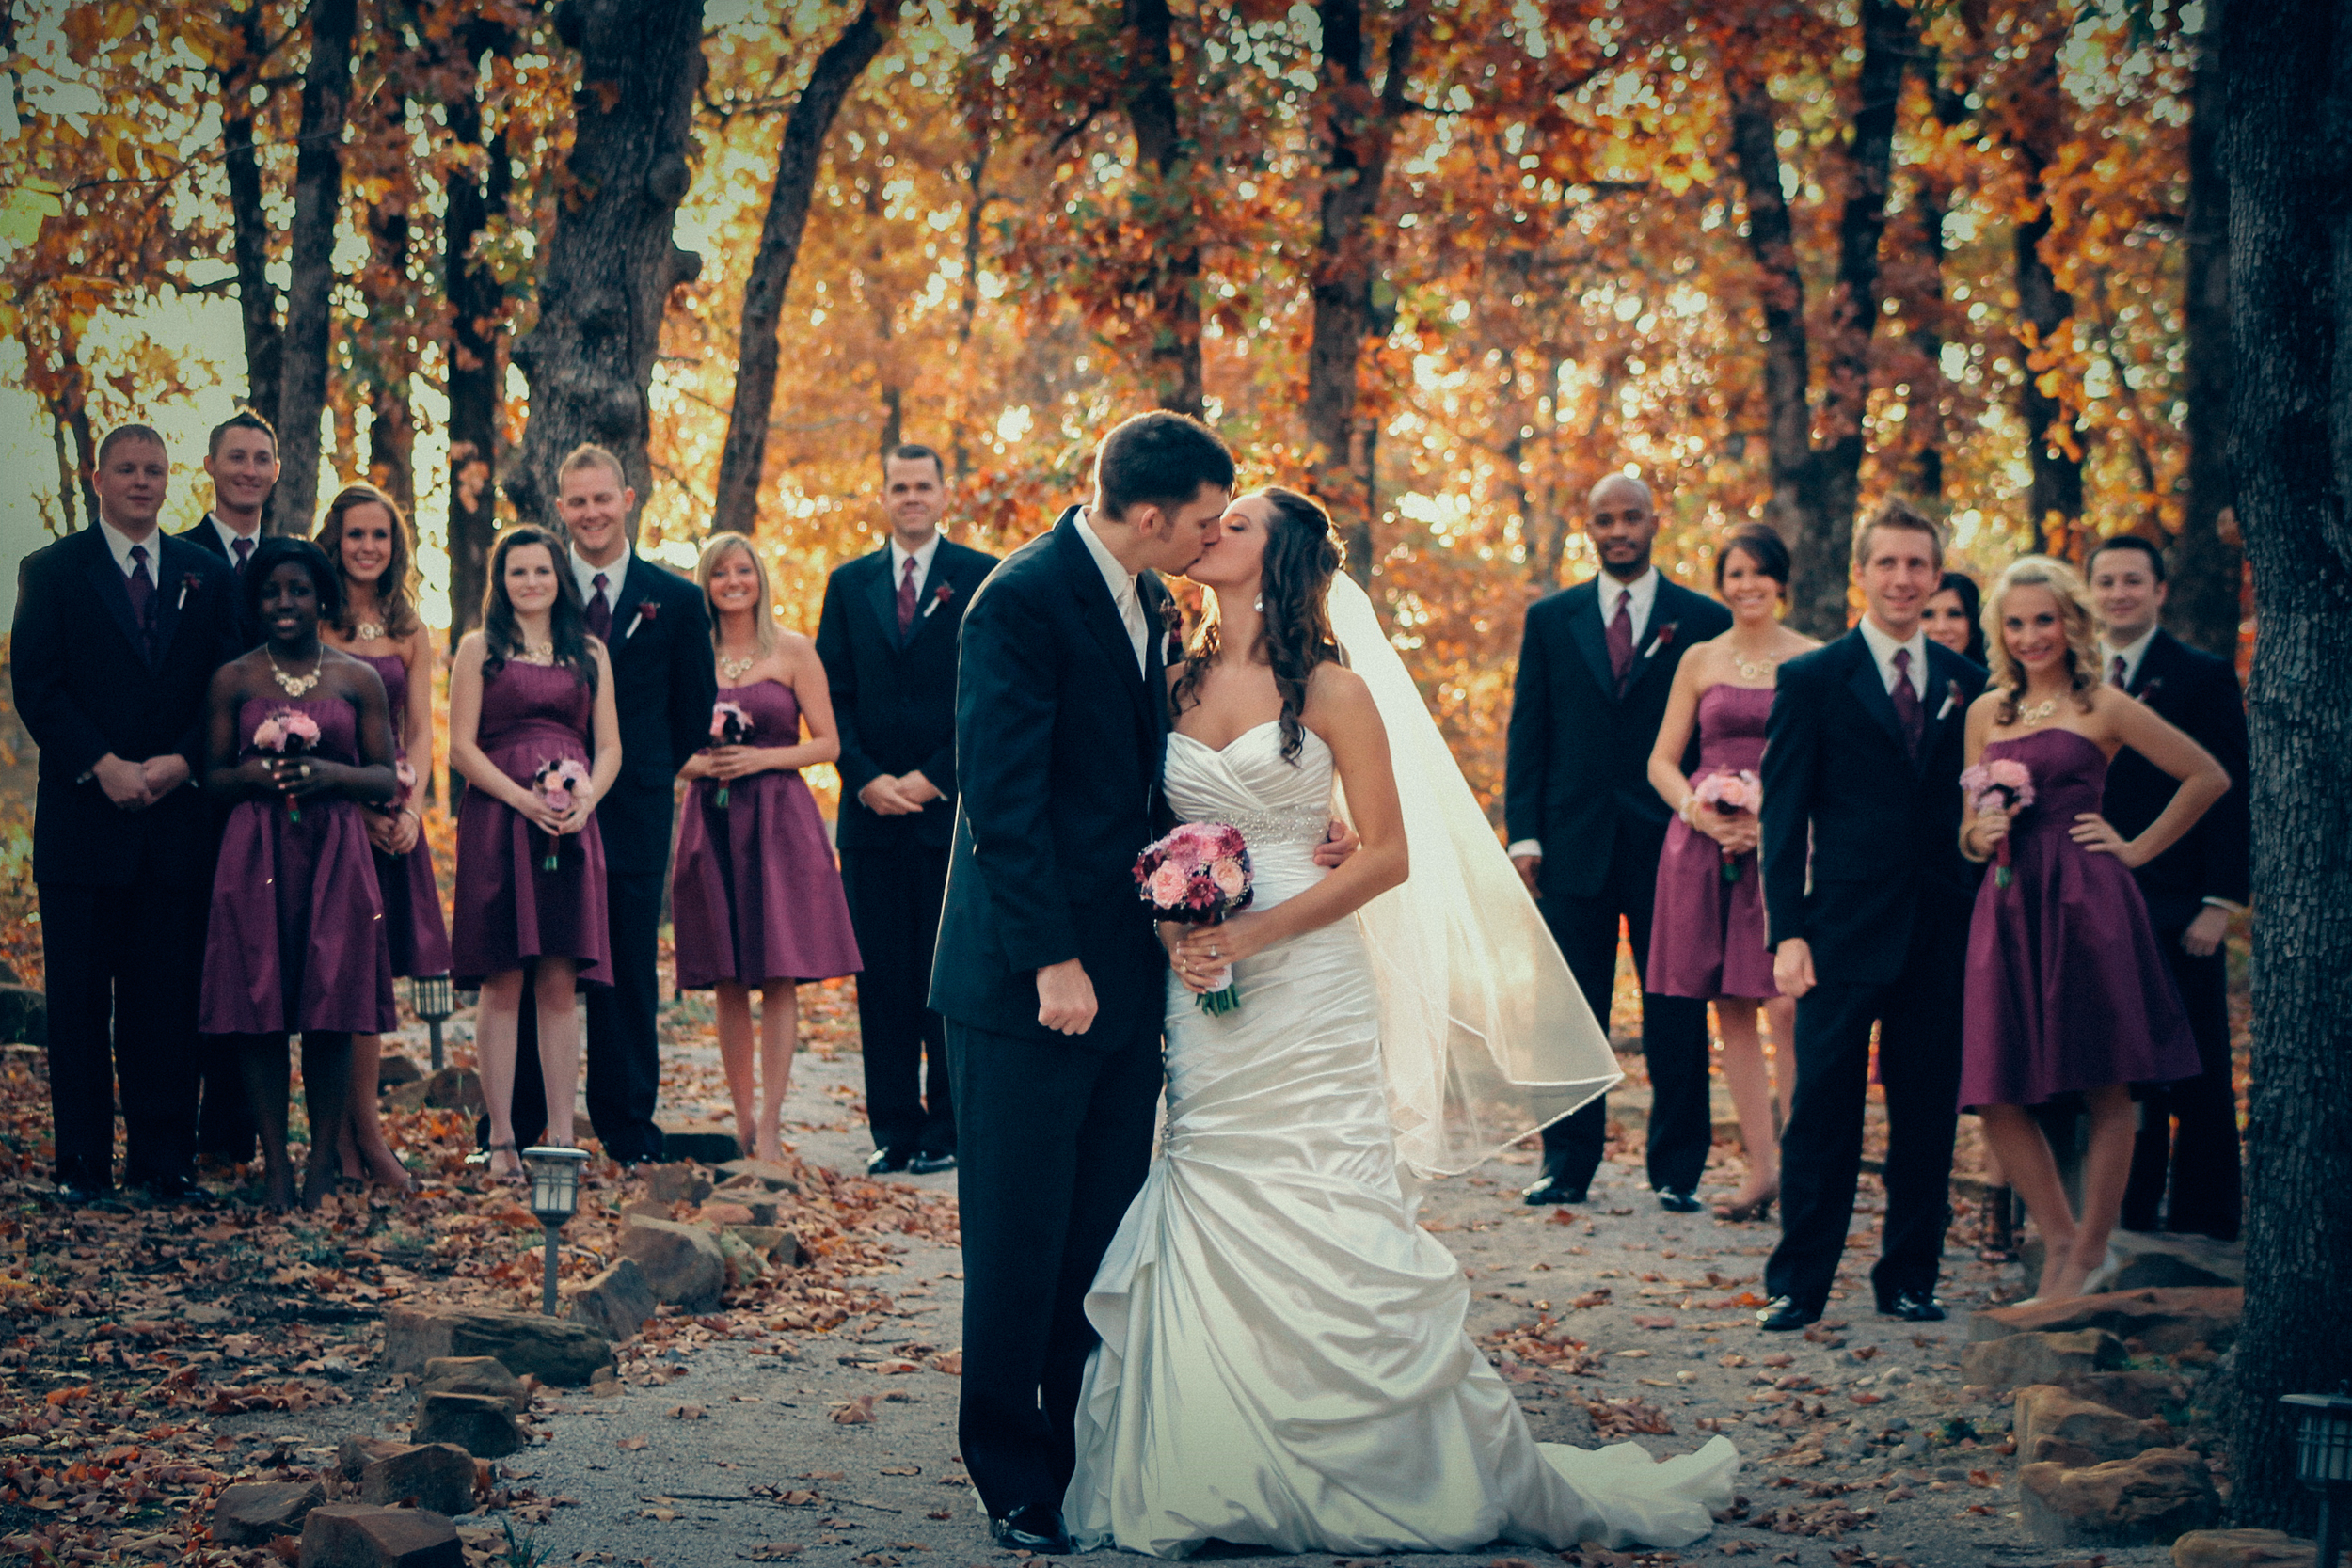 Chad and Stacie | Tulsa Wedding | The picture people (26 of 31).jpg